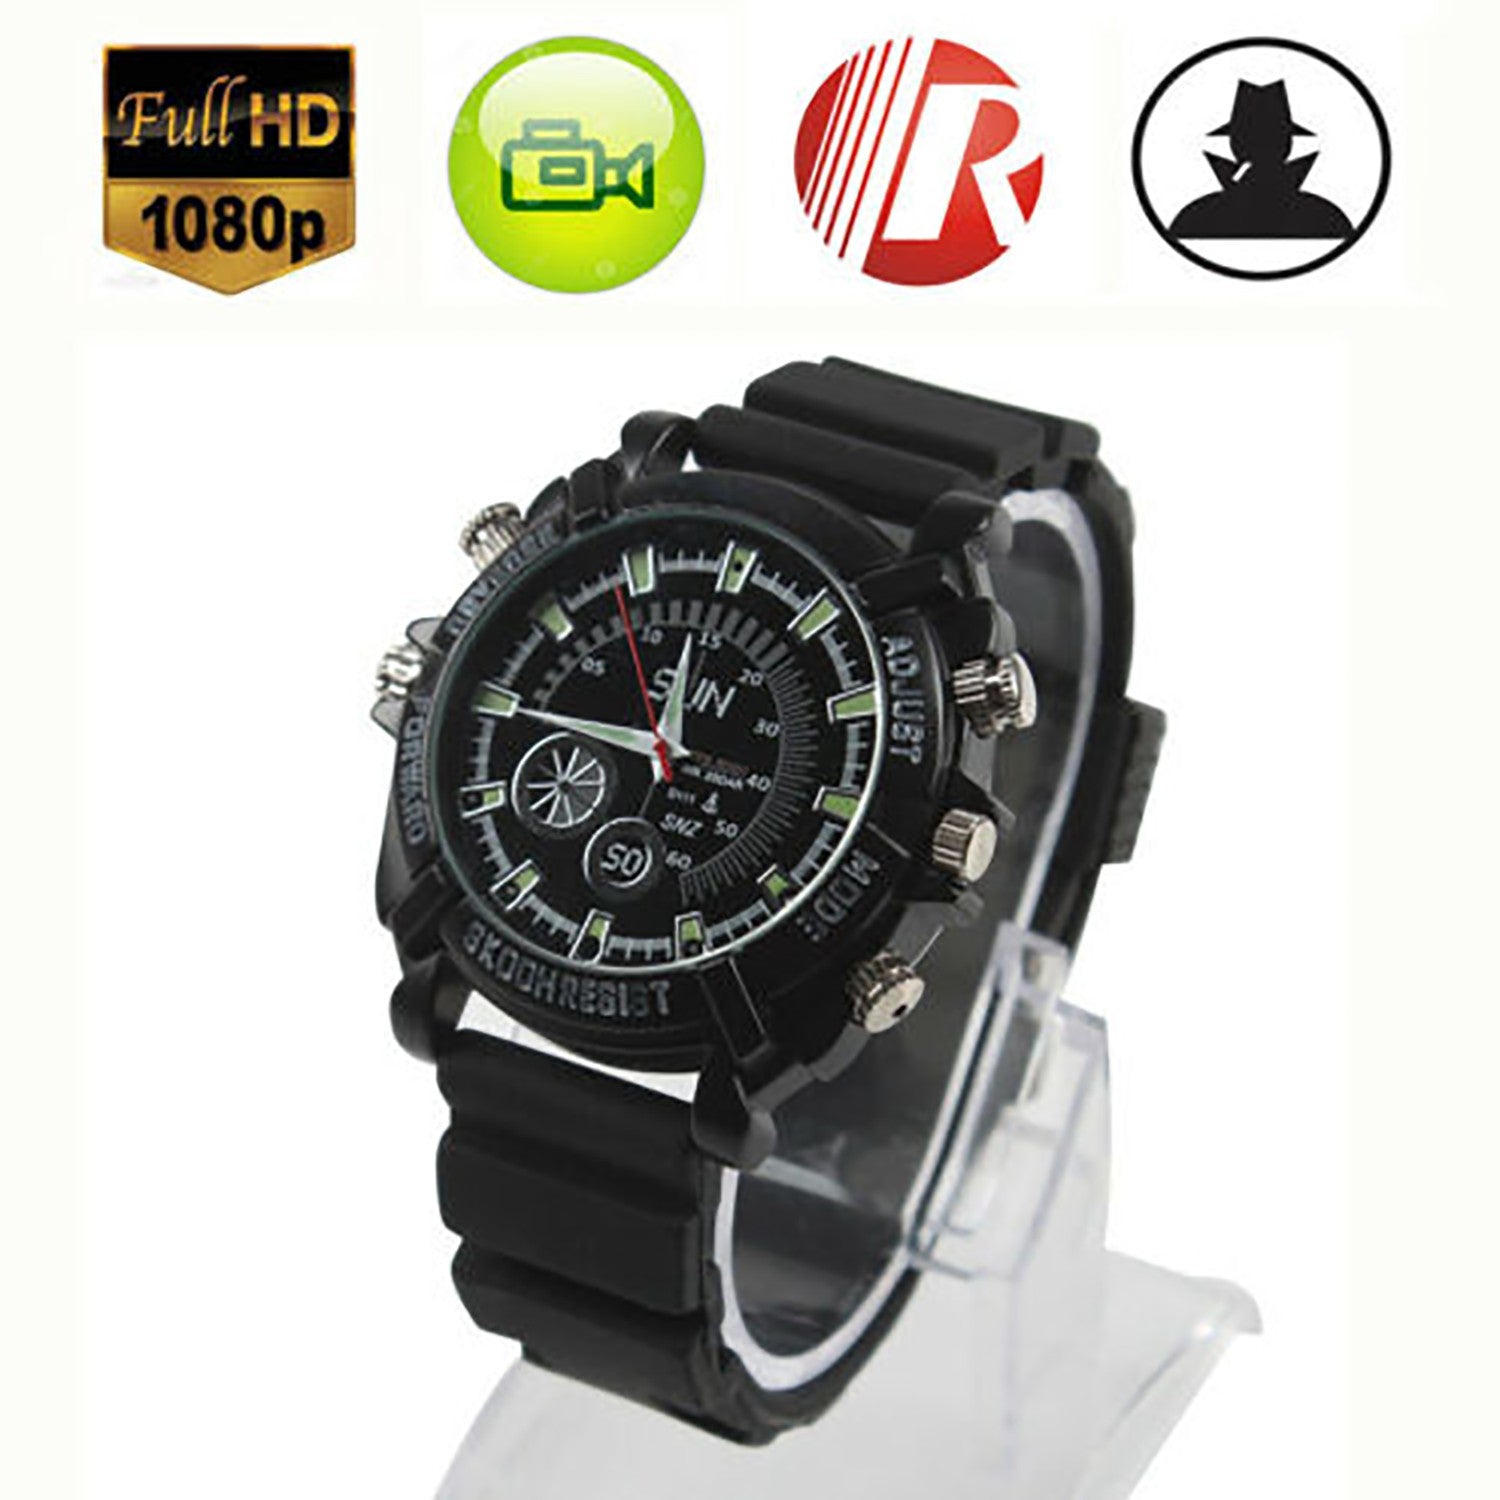 W1000 2 in 1 1080P Watch and Hidden Web Camera with Night Vision Function